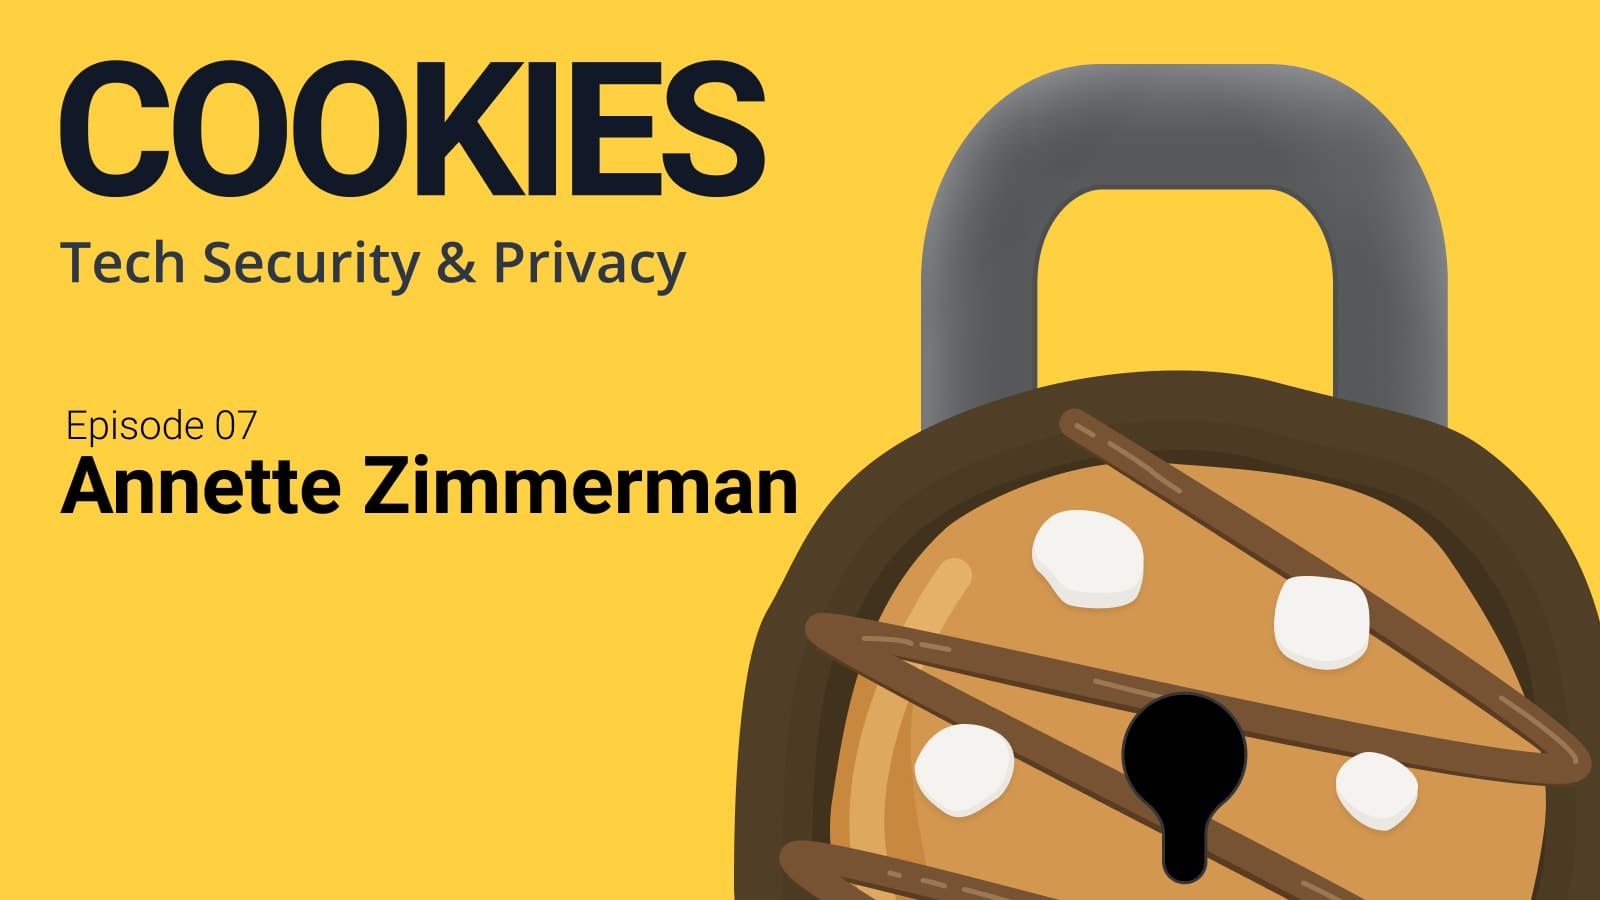 Cookies: Tech Security & Privacy. Episode 7, Annette Zimmermann. Image of cookie with a lock on it. Cookie is brown and has drizzle and marshmallows.